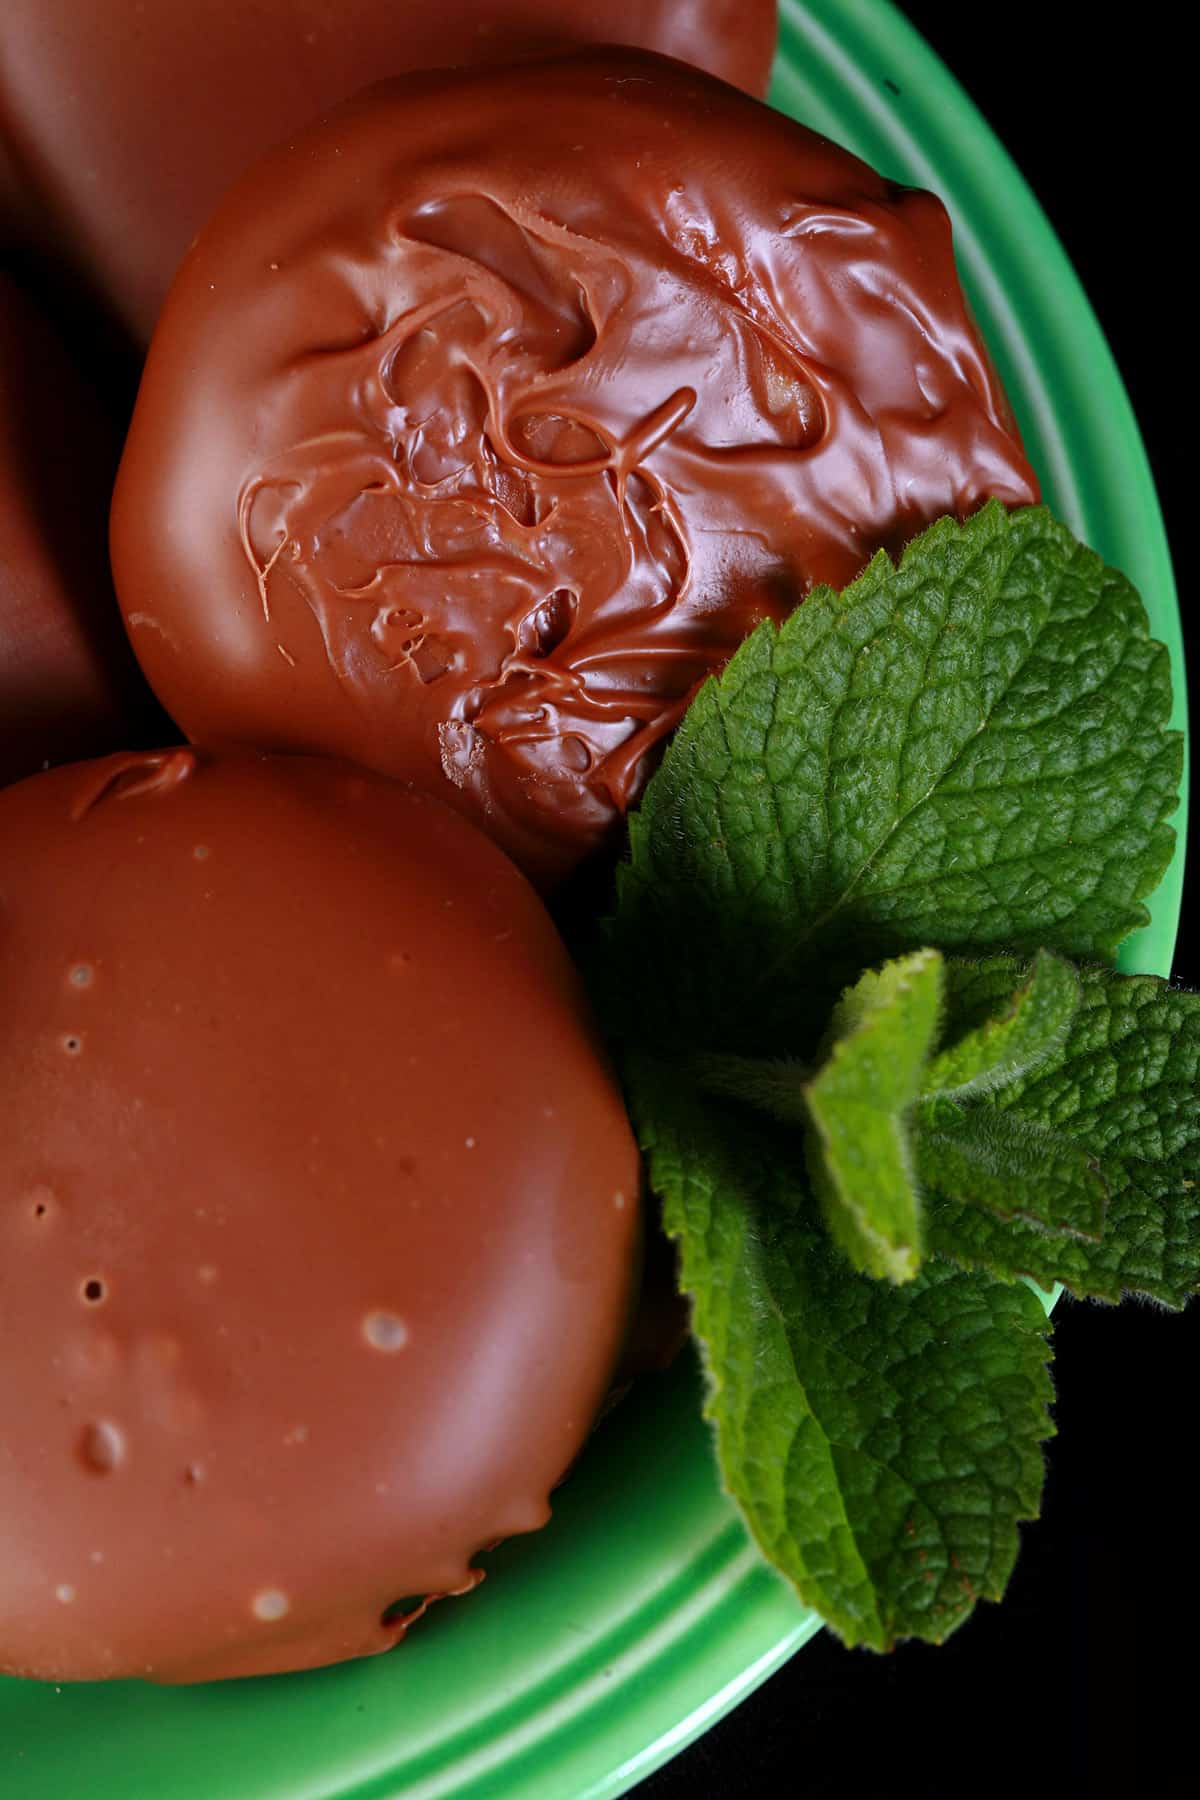 Several homemade peppermint patties on a small green plate, with a sprig of mint.